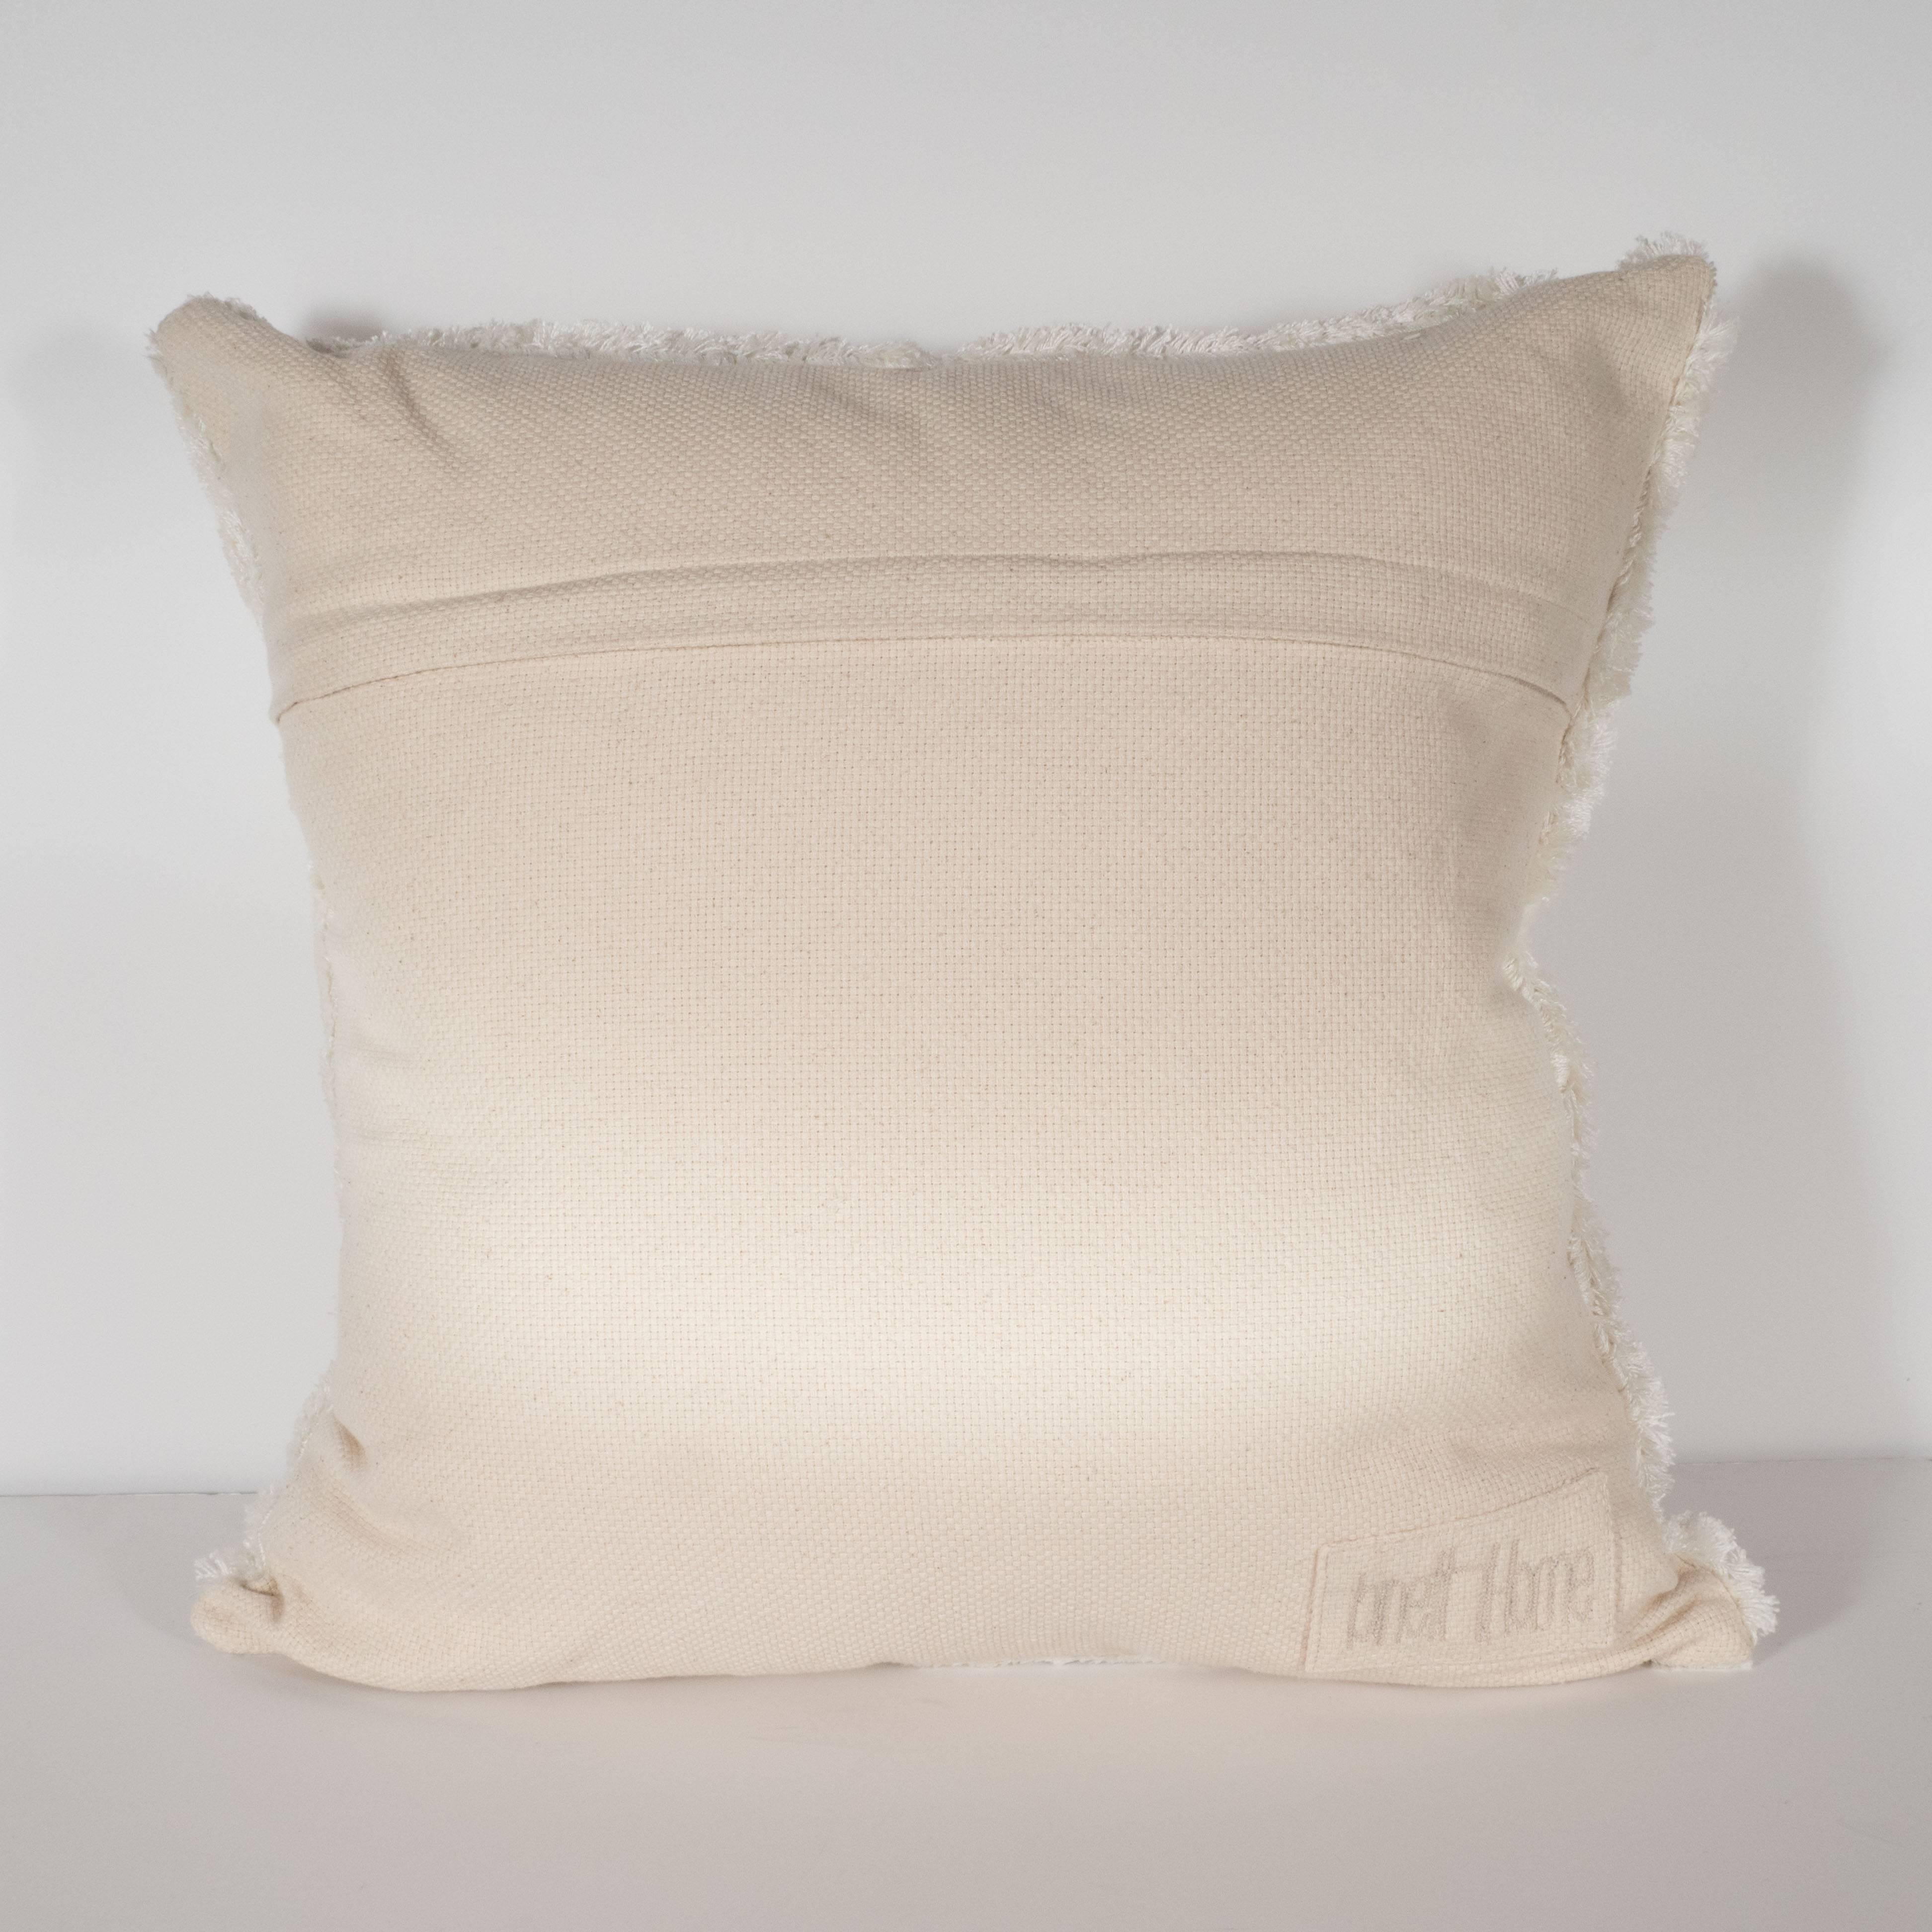 Contemporary Modernist Textural Cotton Cream Pillow with White Geometric Patterns Throughout For Sale